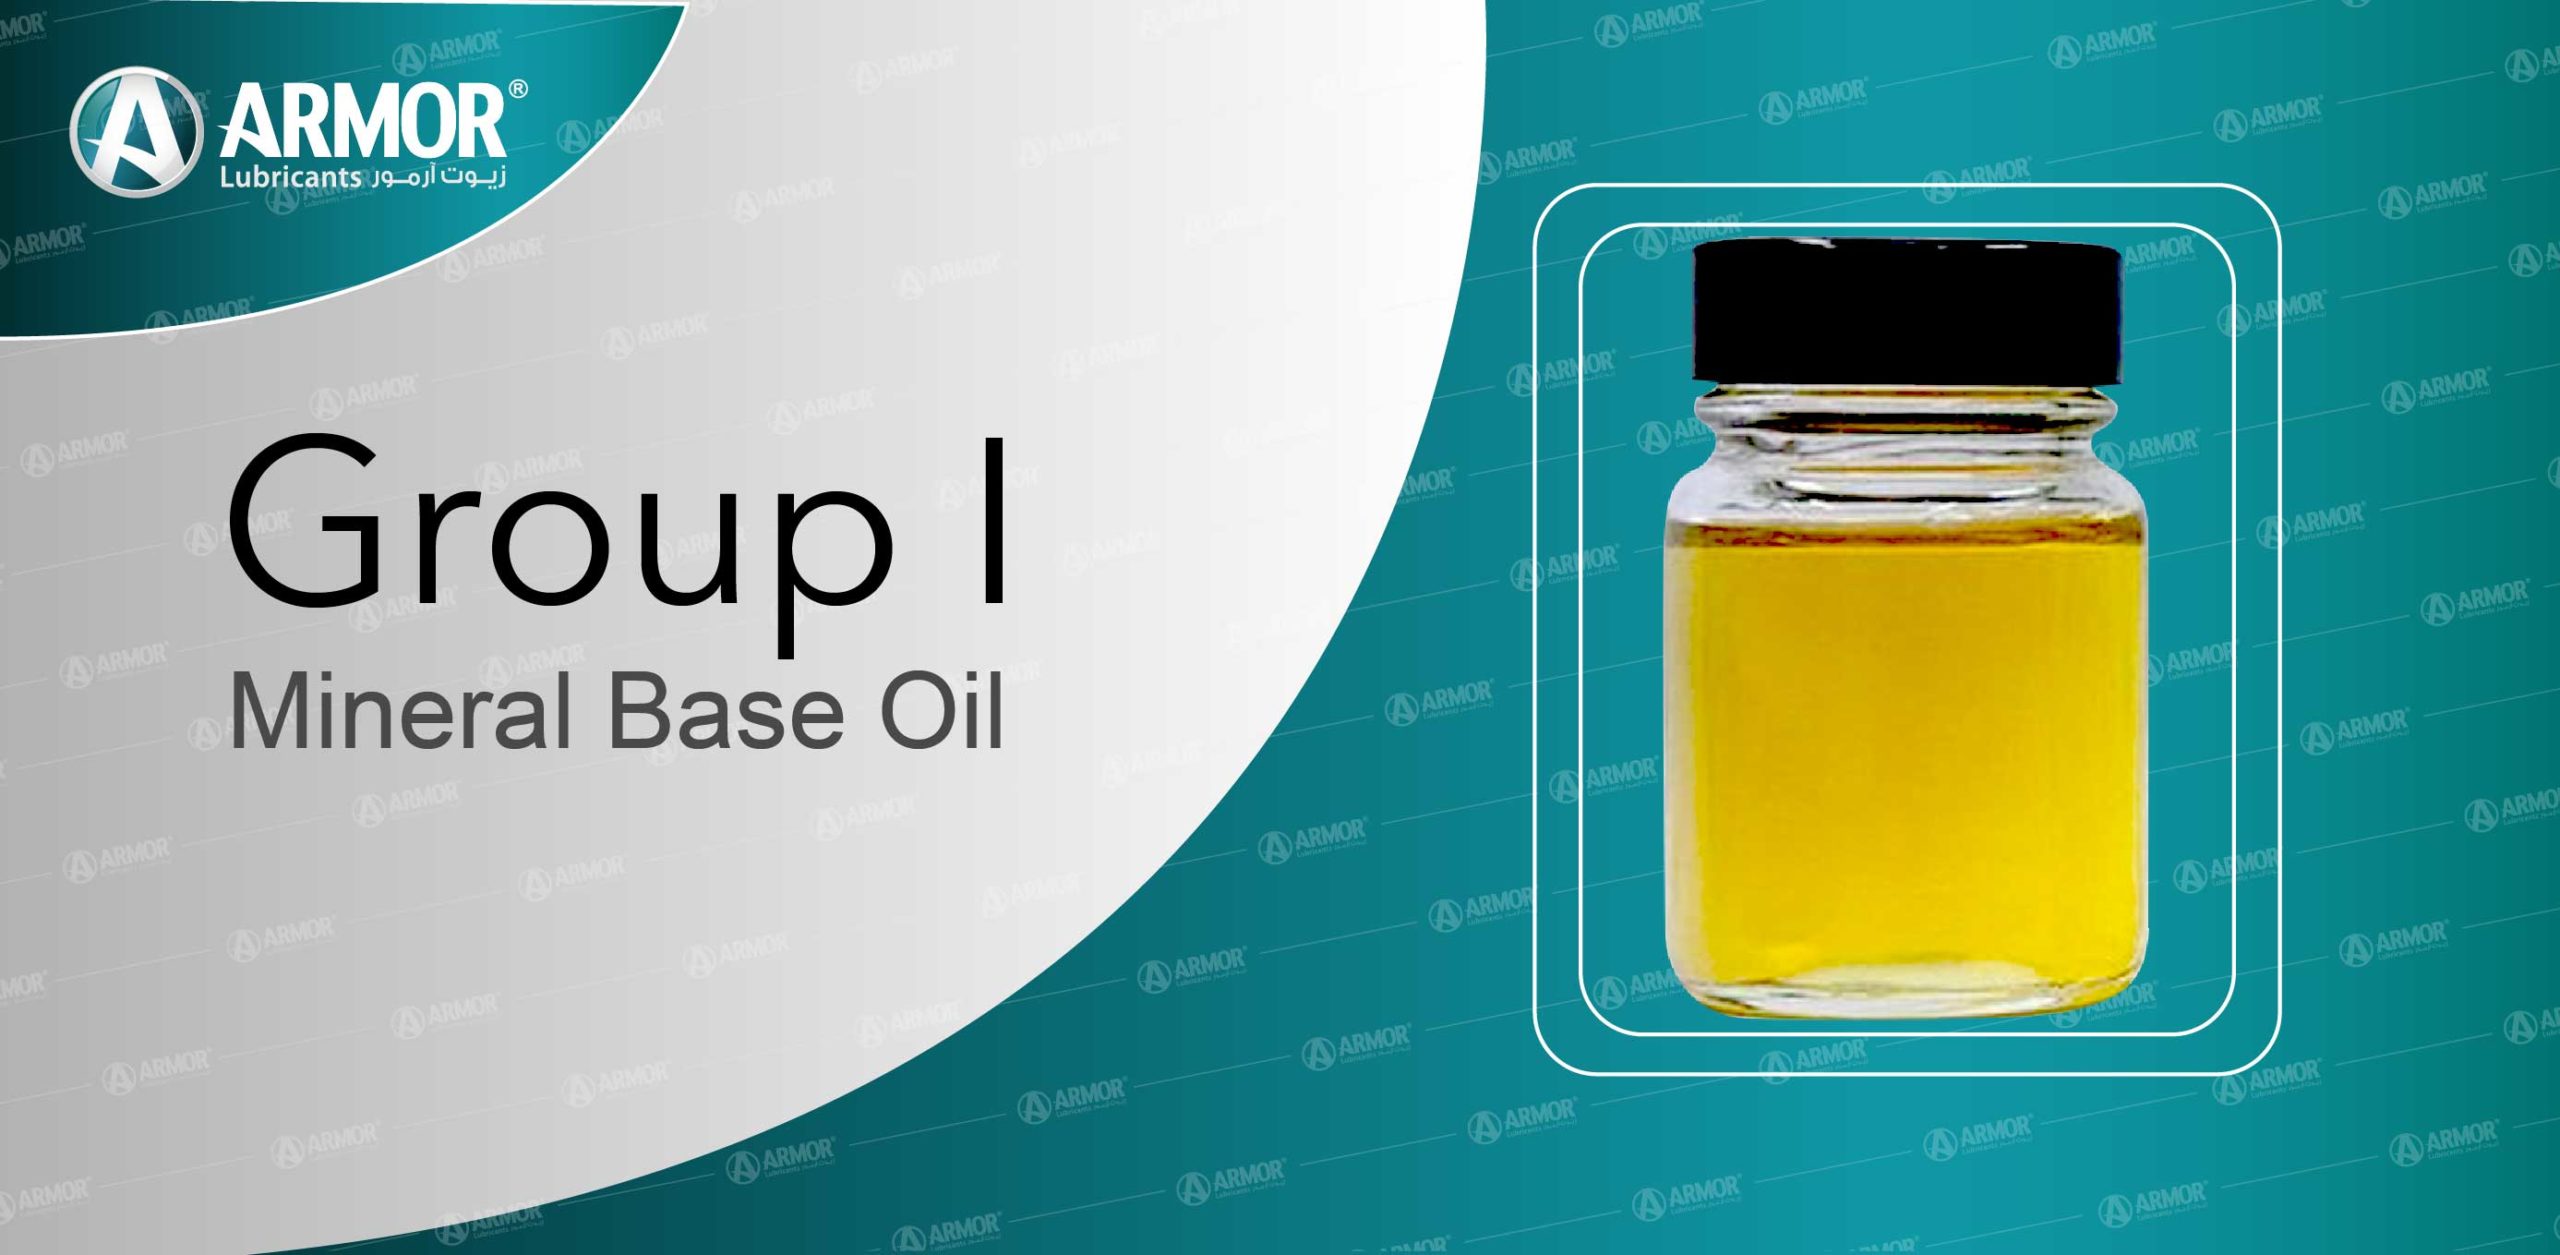 Group 1 Mineral Base Oil